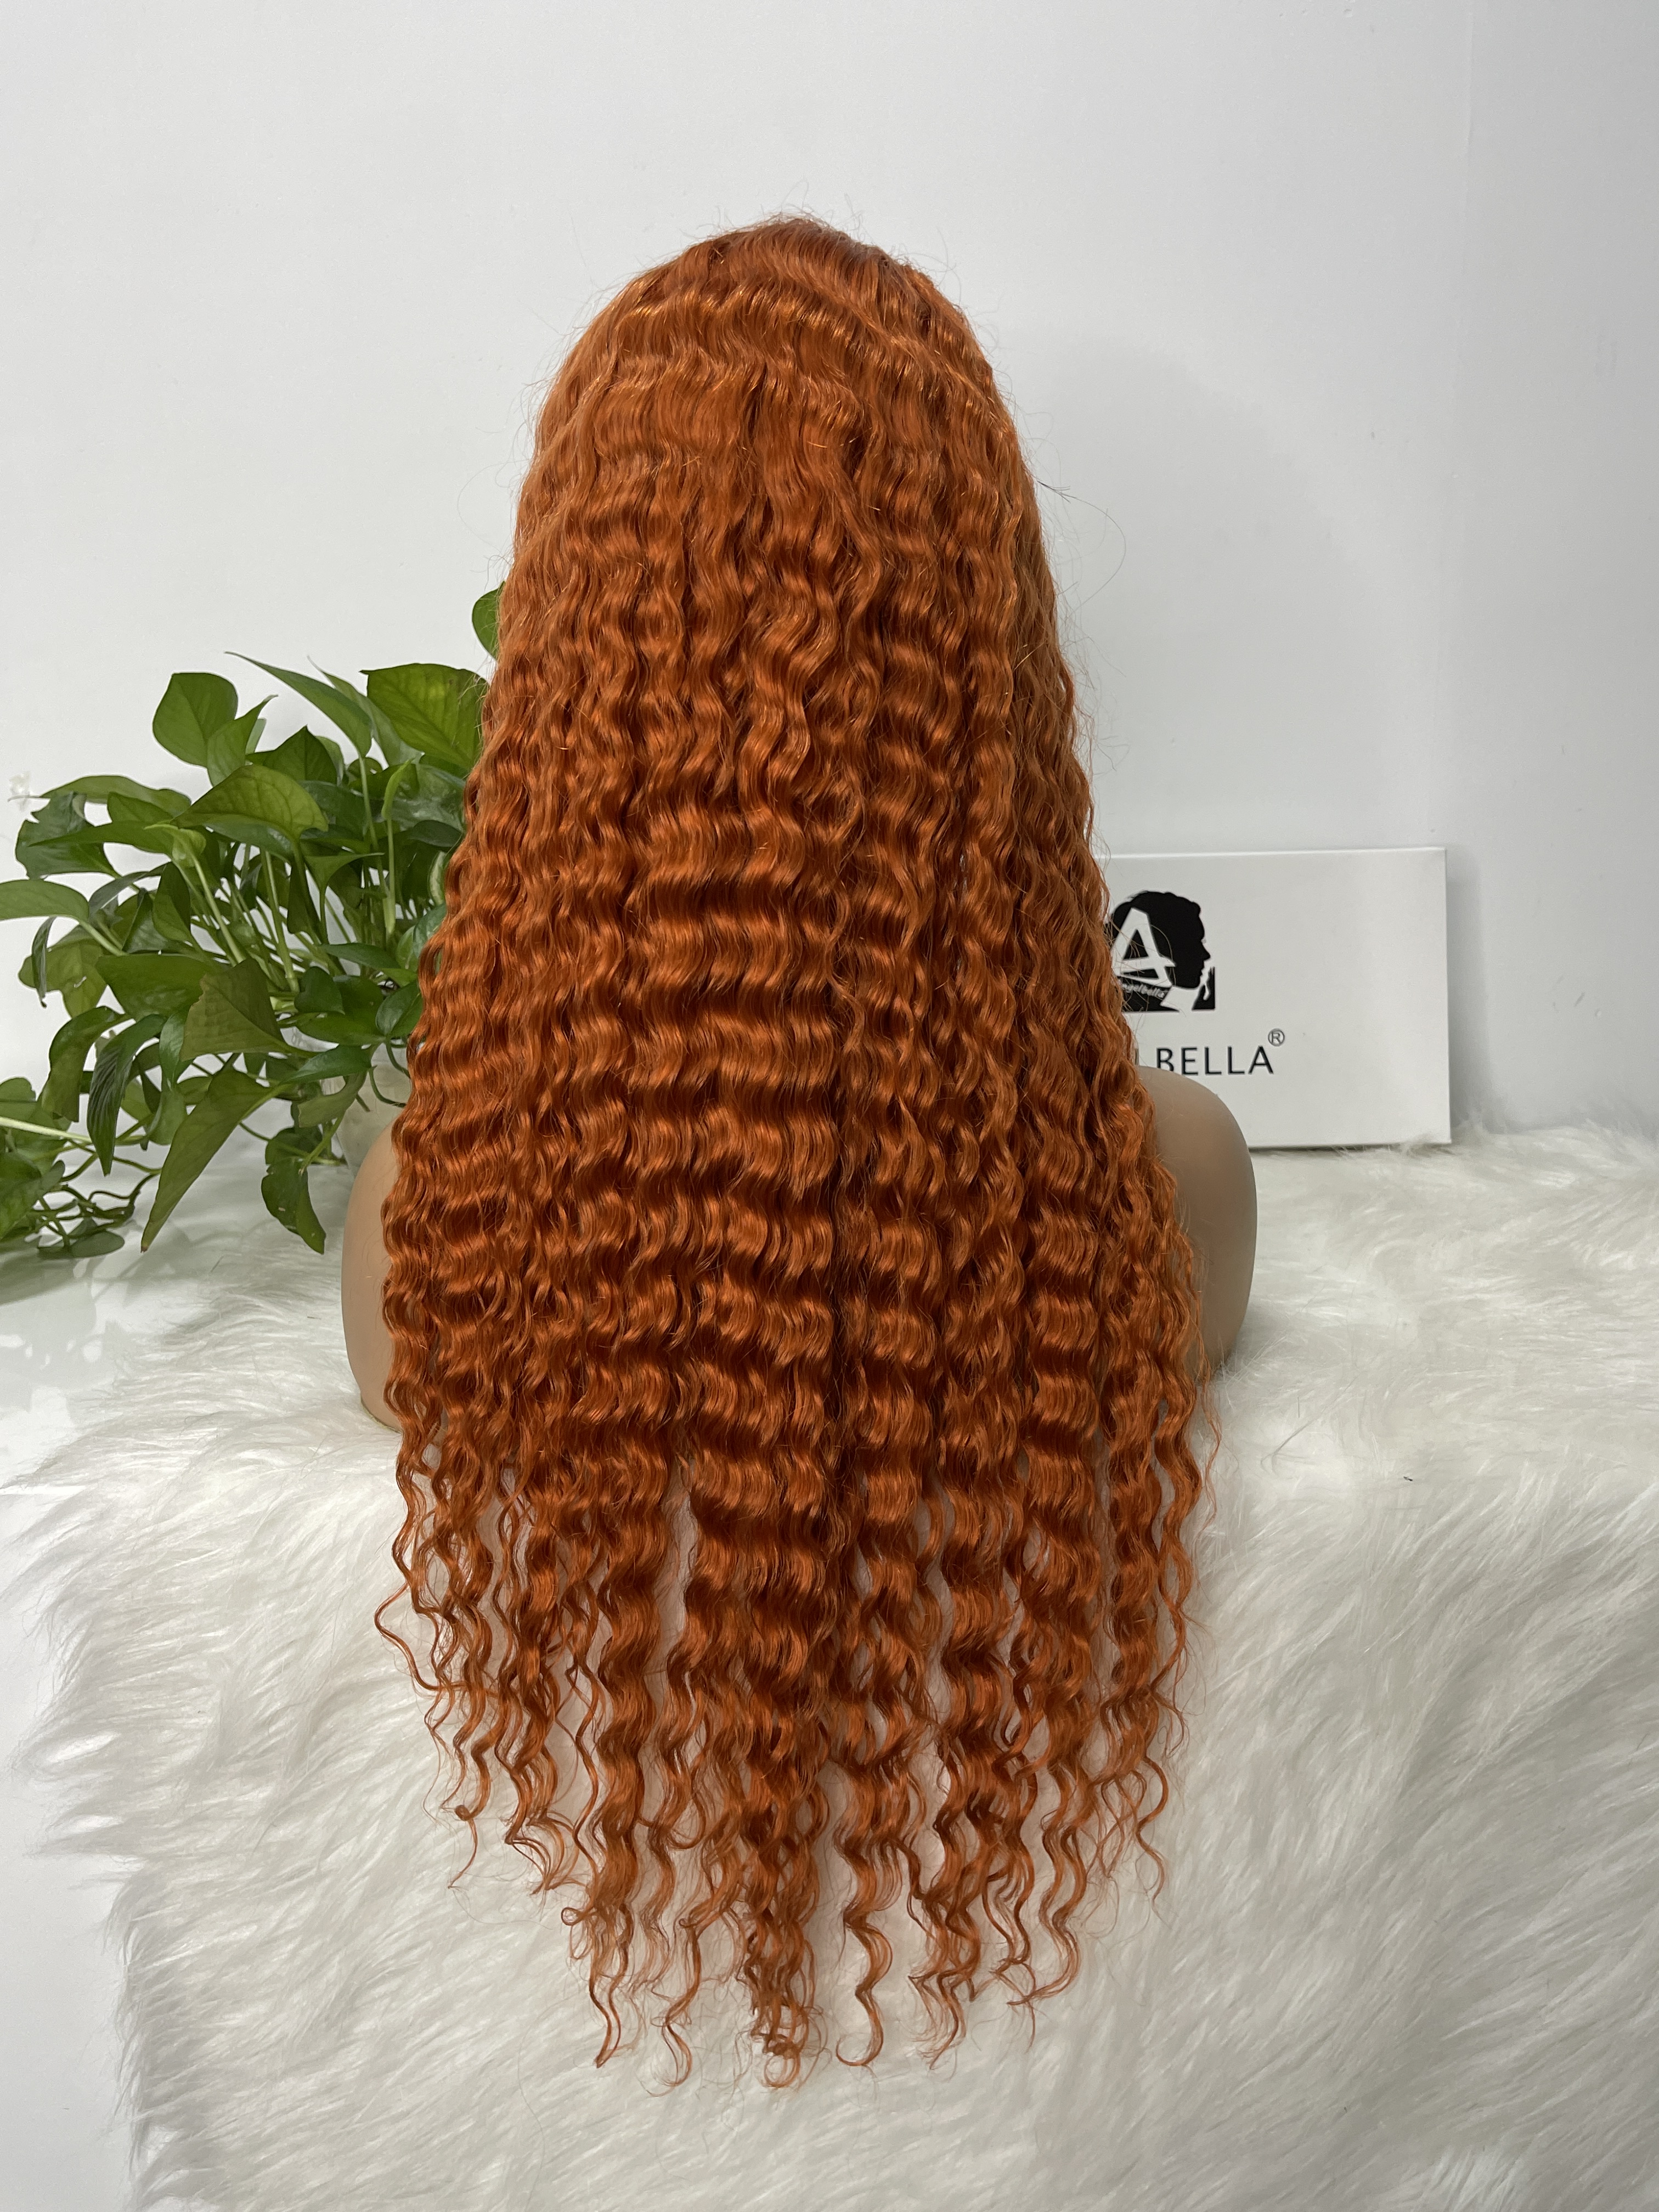 Angelbella 2022 New Style Orange Ginger Color 13X1x4 T Part Lace Front Wig Human Hair 